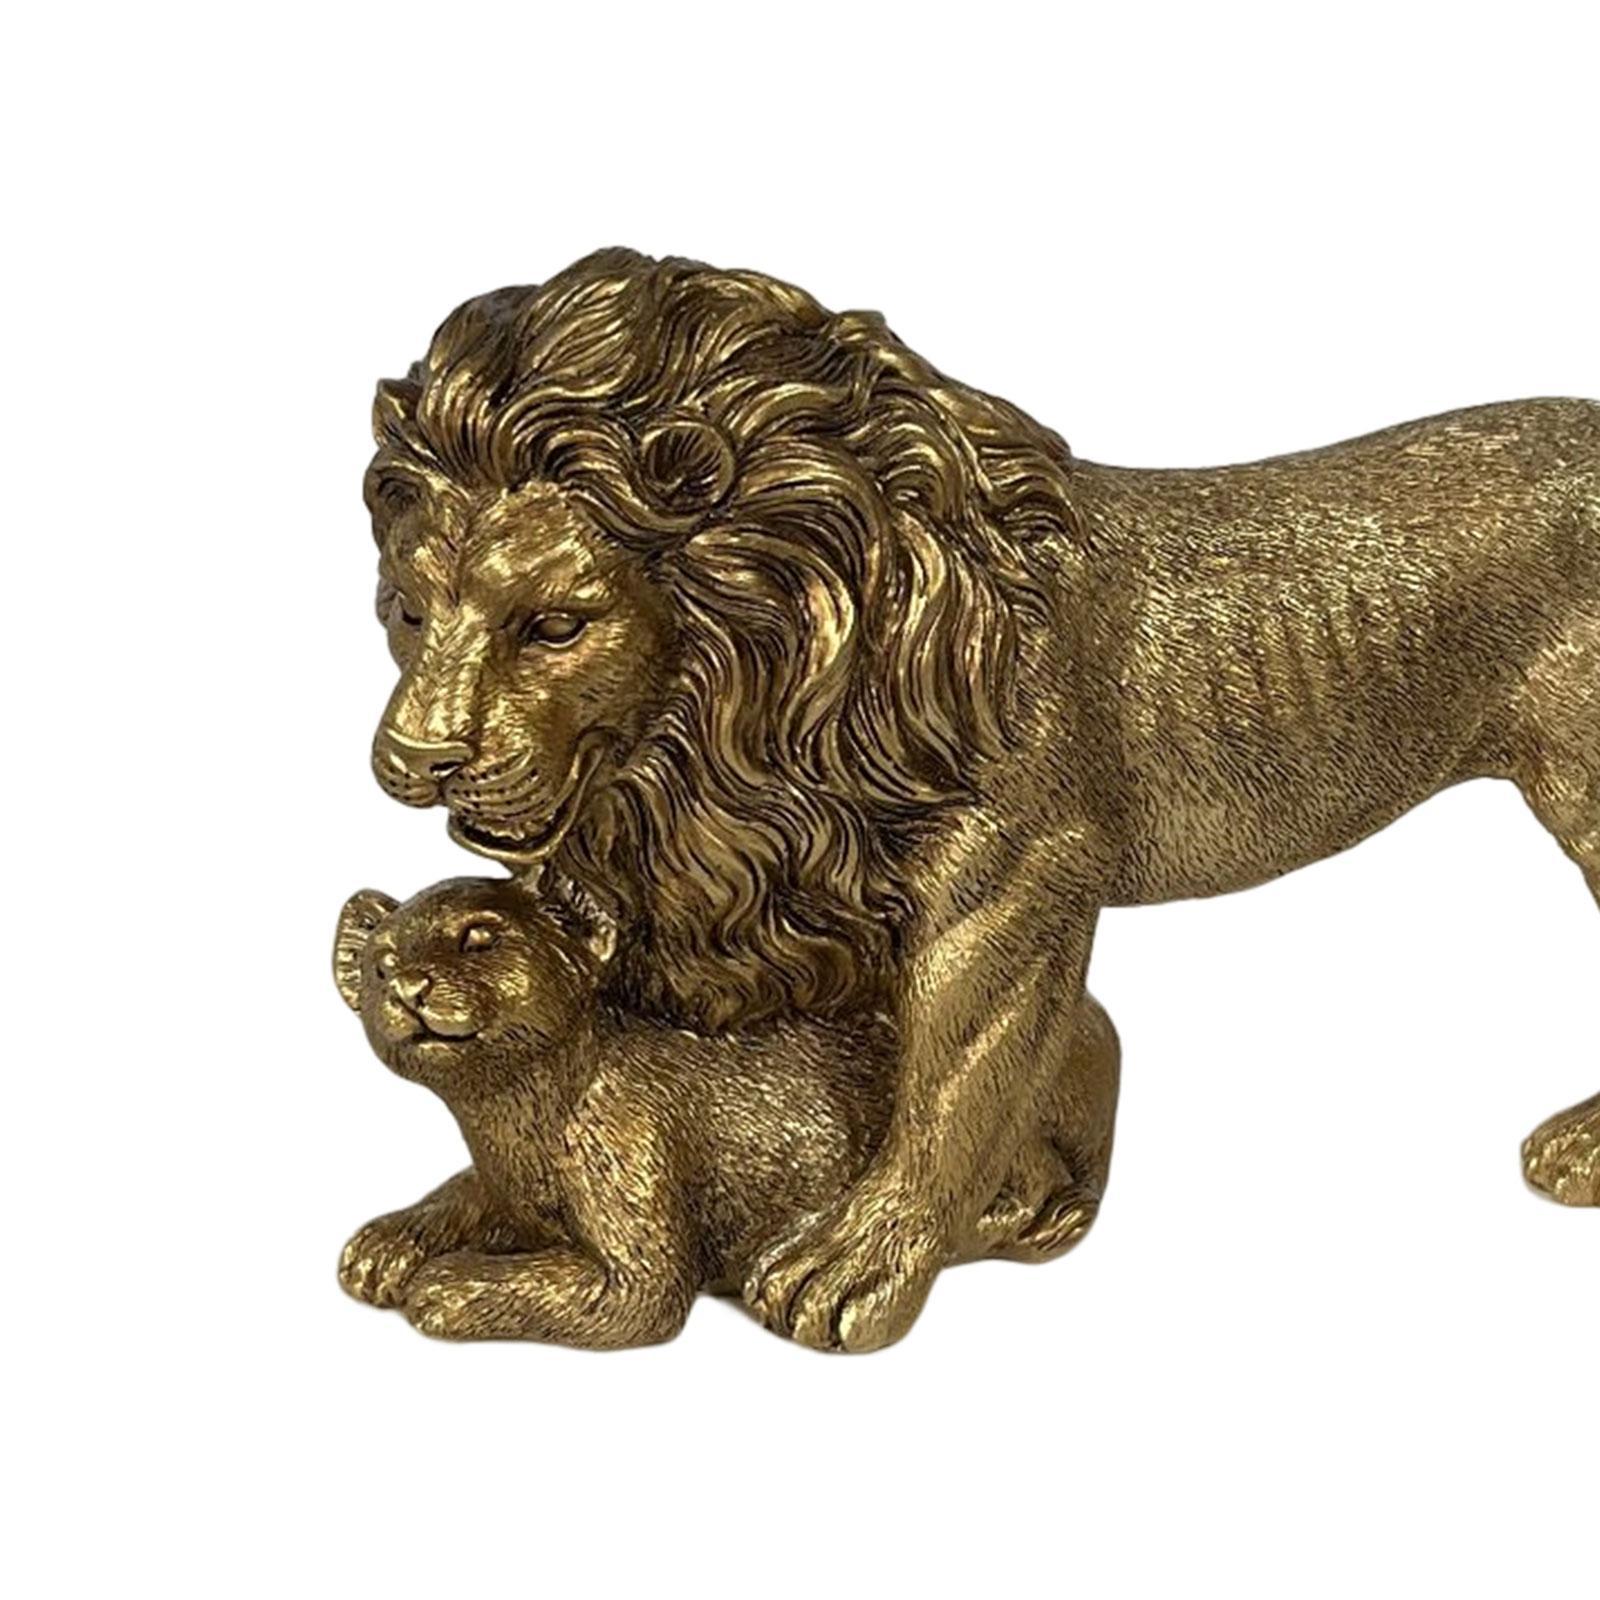 Lion King Statue Animal Figurine Ornament for Office Living Room Accessories